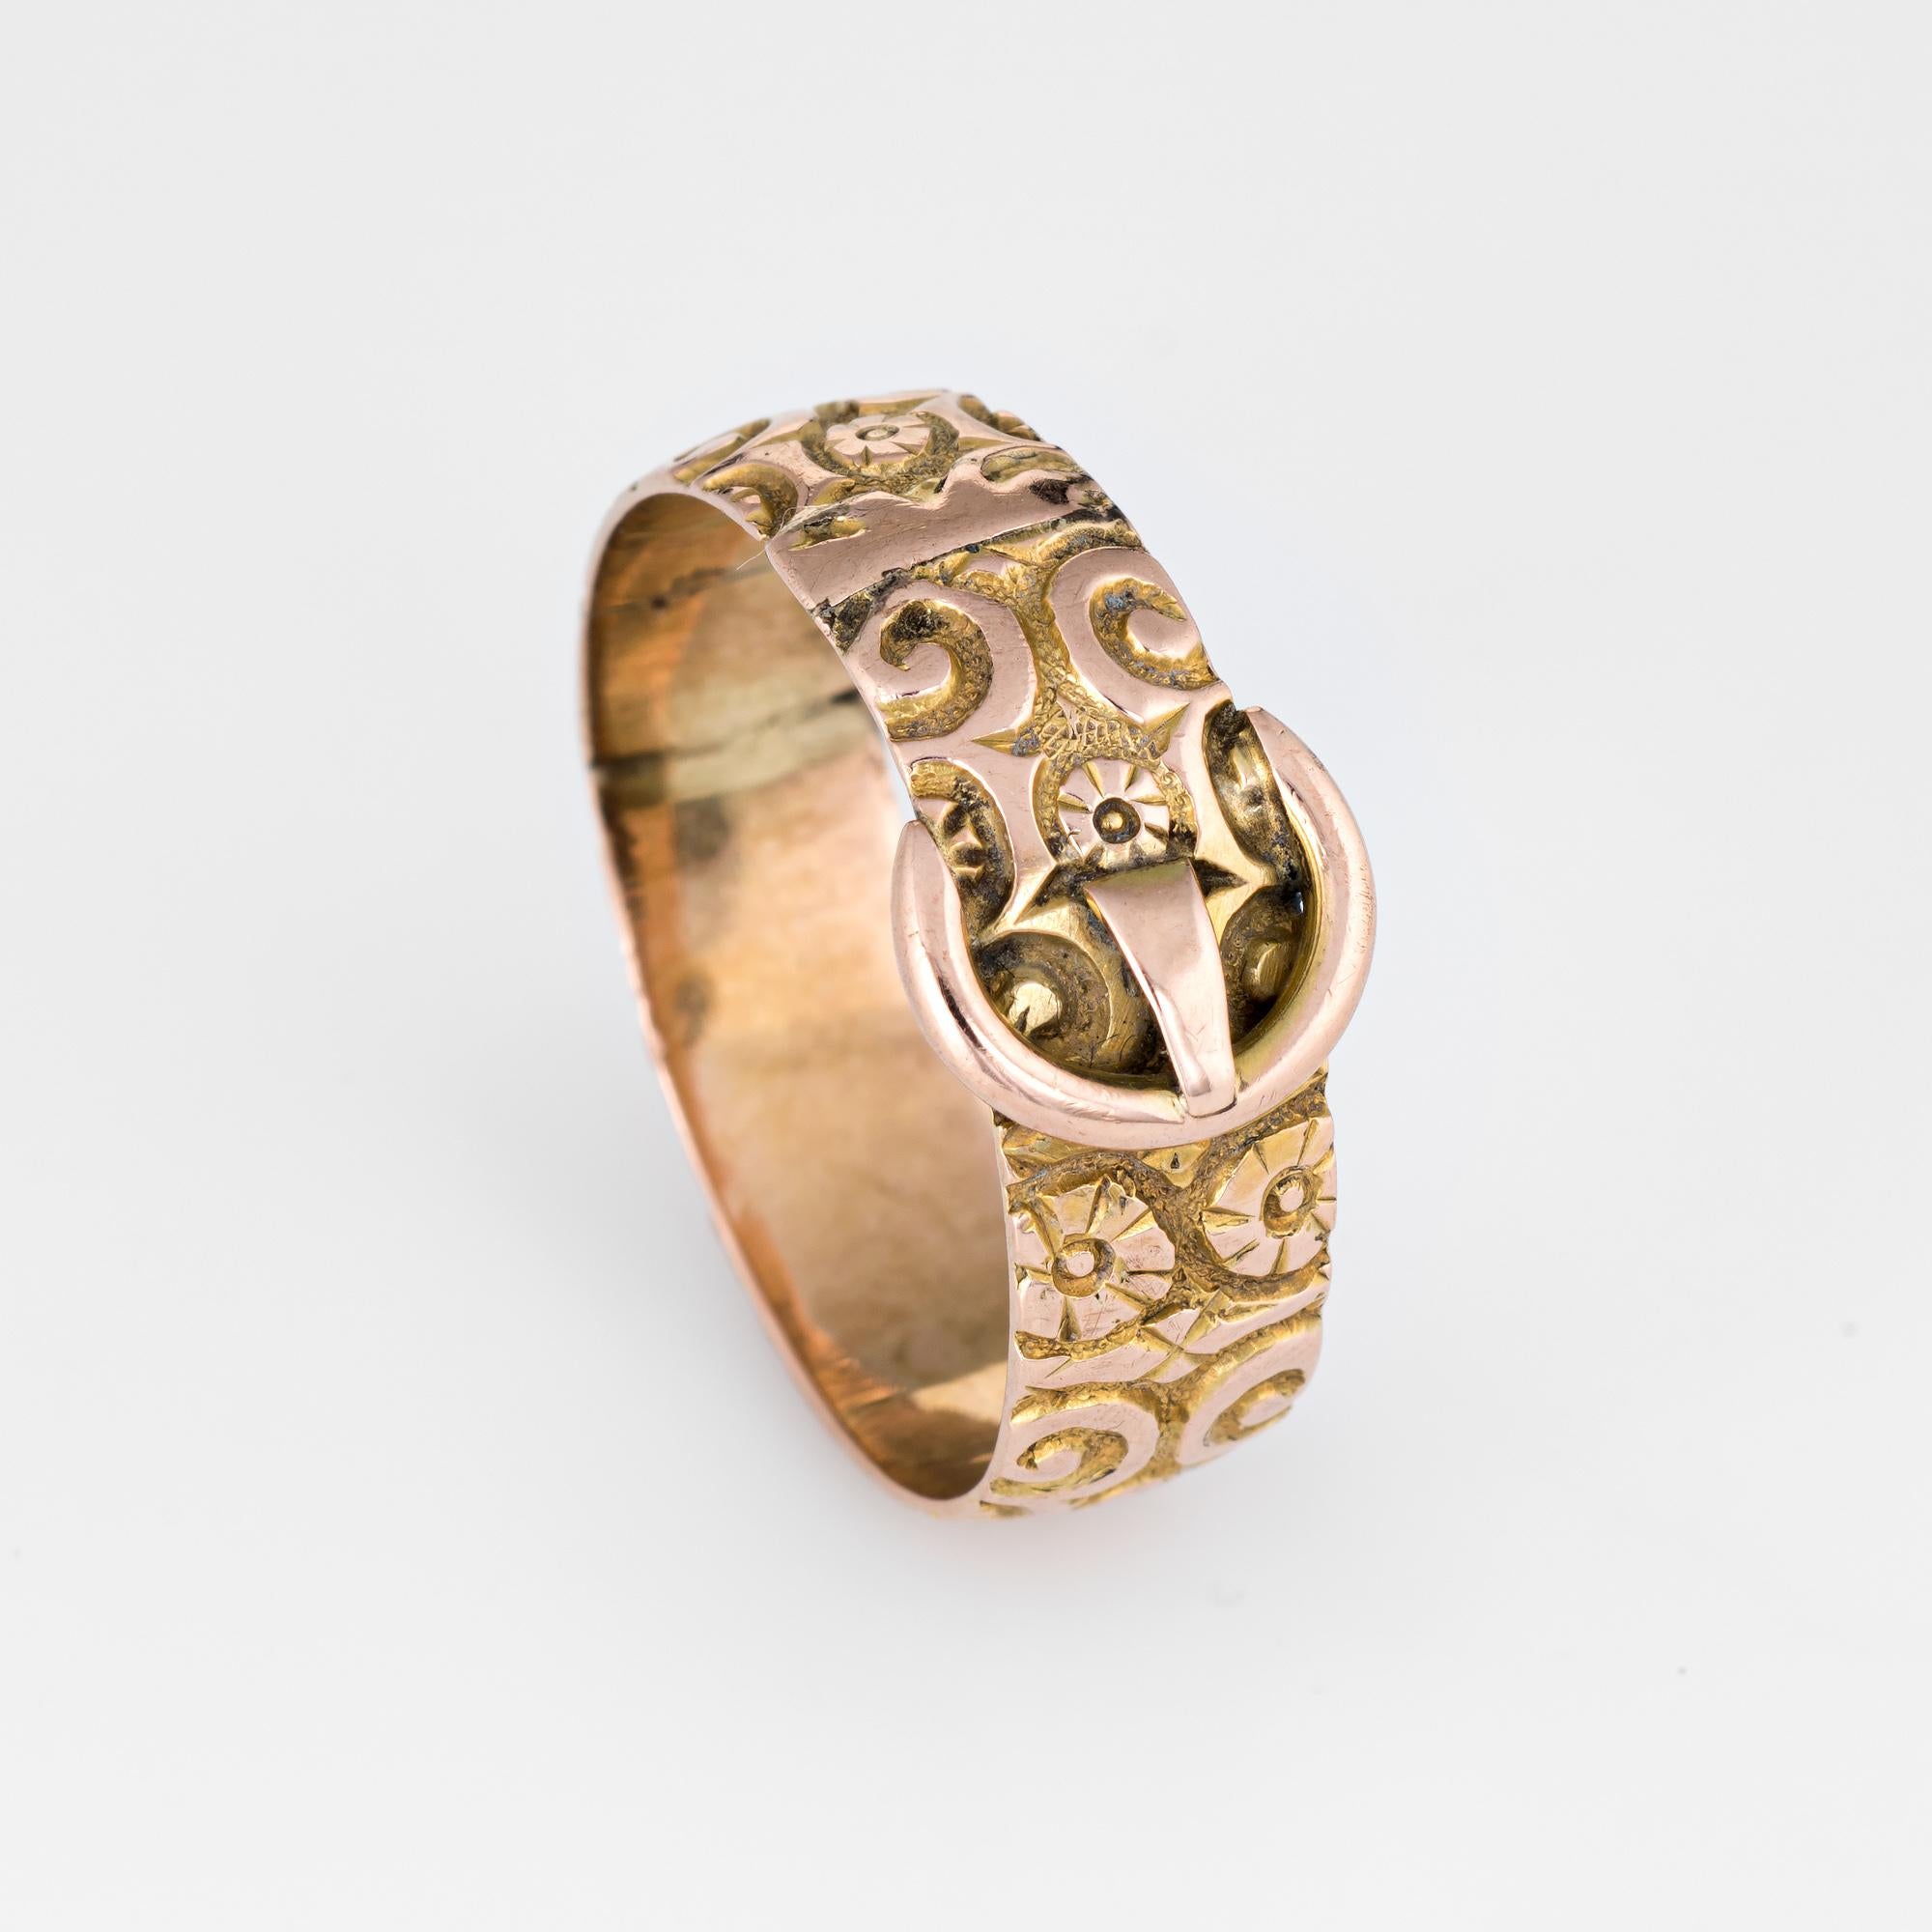 Finely detailed antique buckle ring (circa 1913) crafted in 9 karat rose gold. 

The stylish antique ring features the ever popular buckle design that symbolizes the joining of two lives together. The ring is great worn alone, stacked or as an